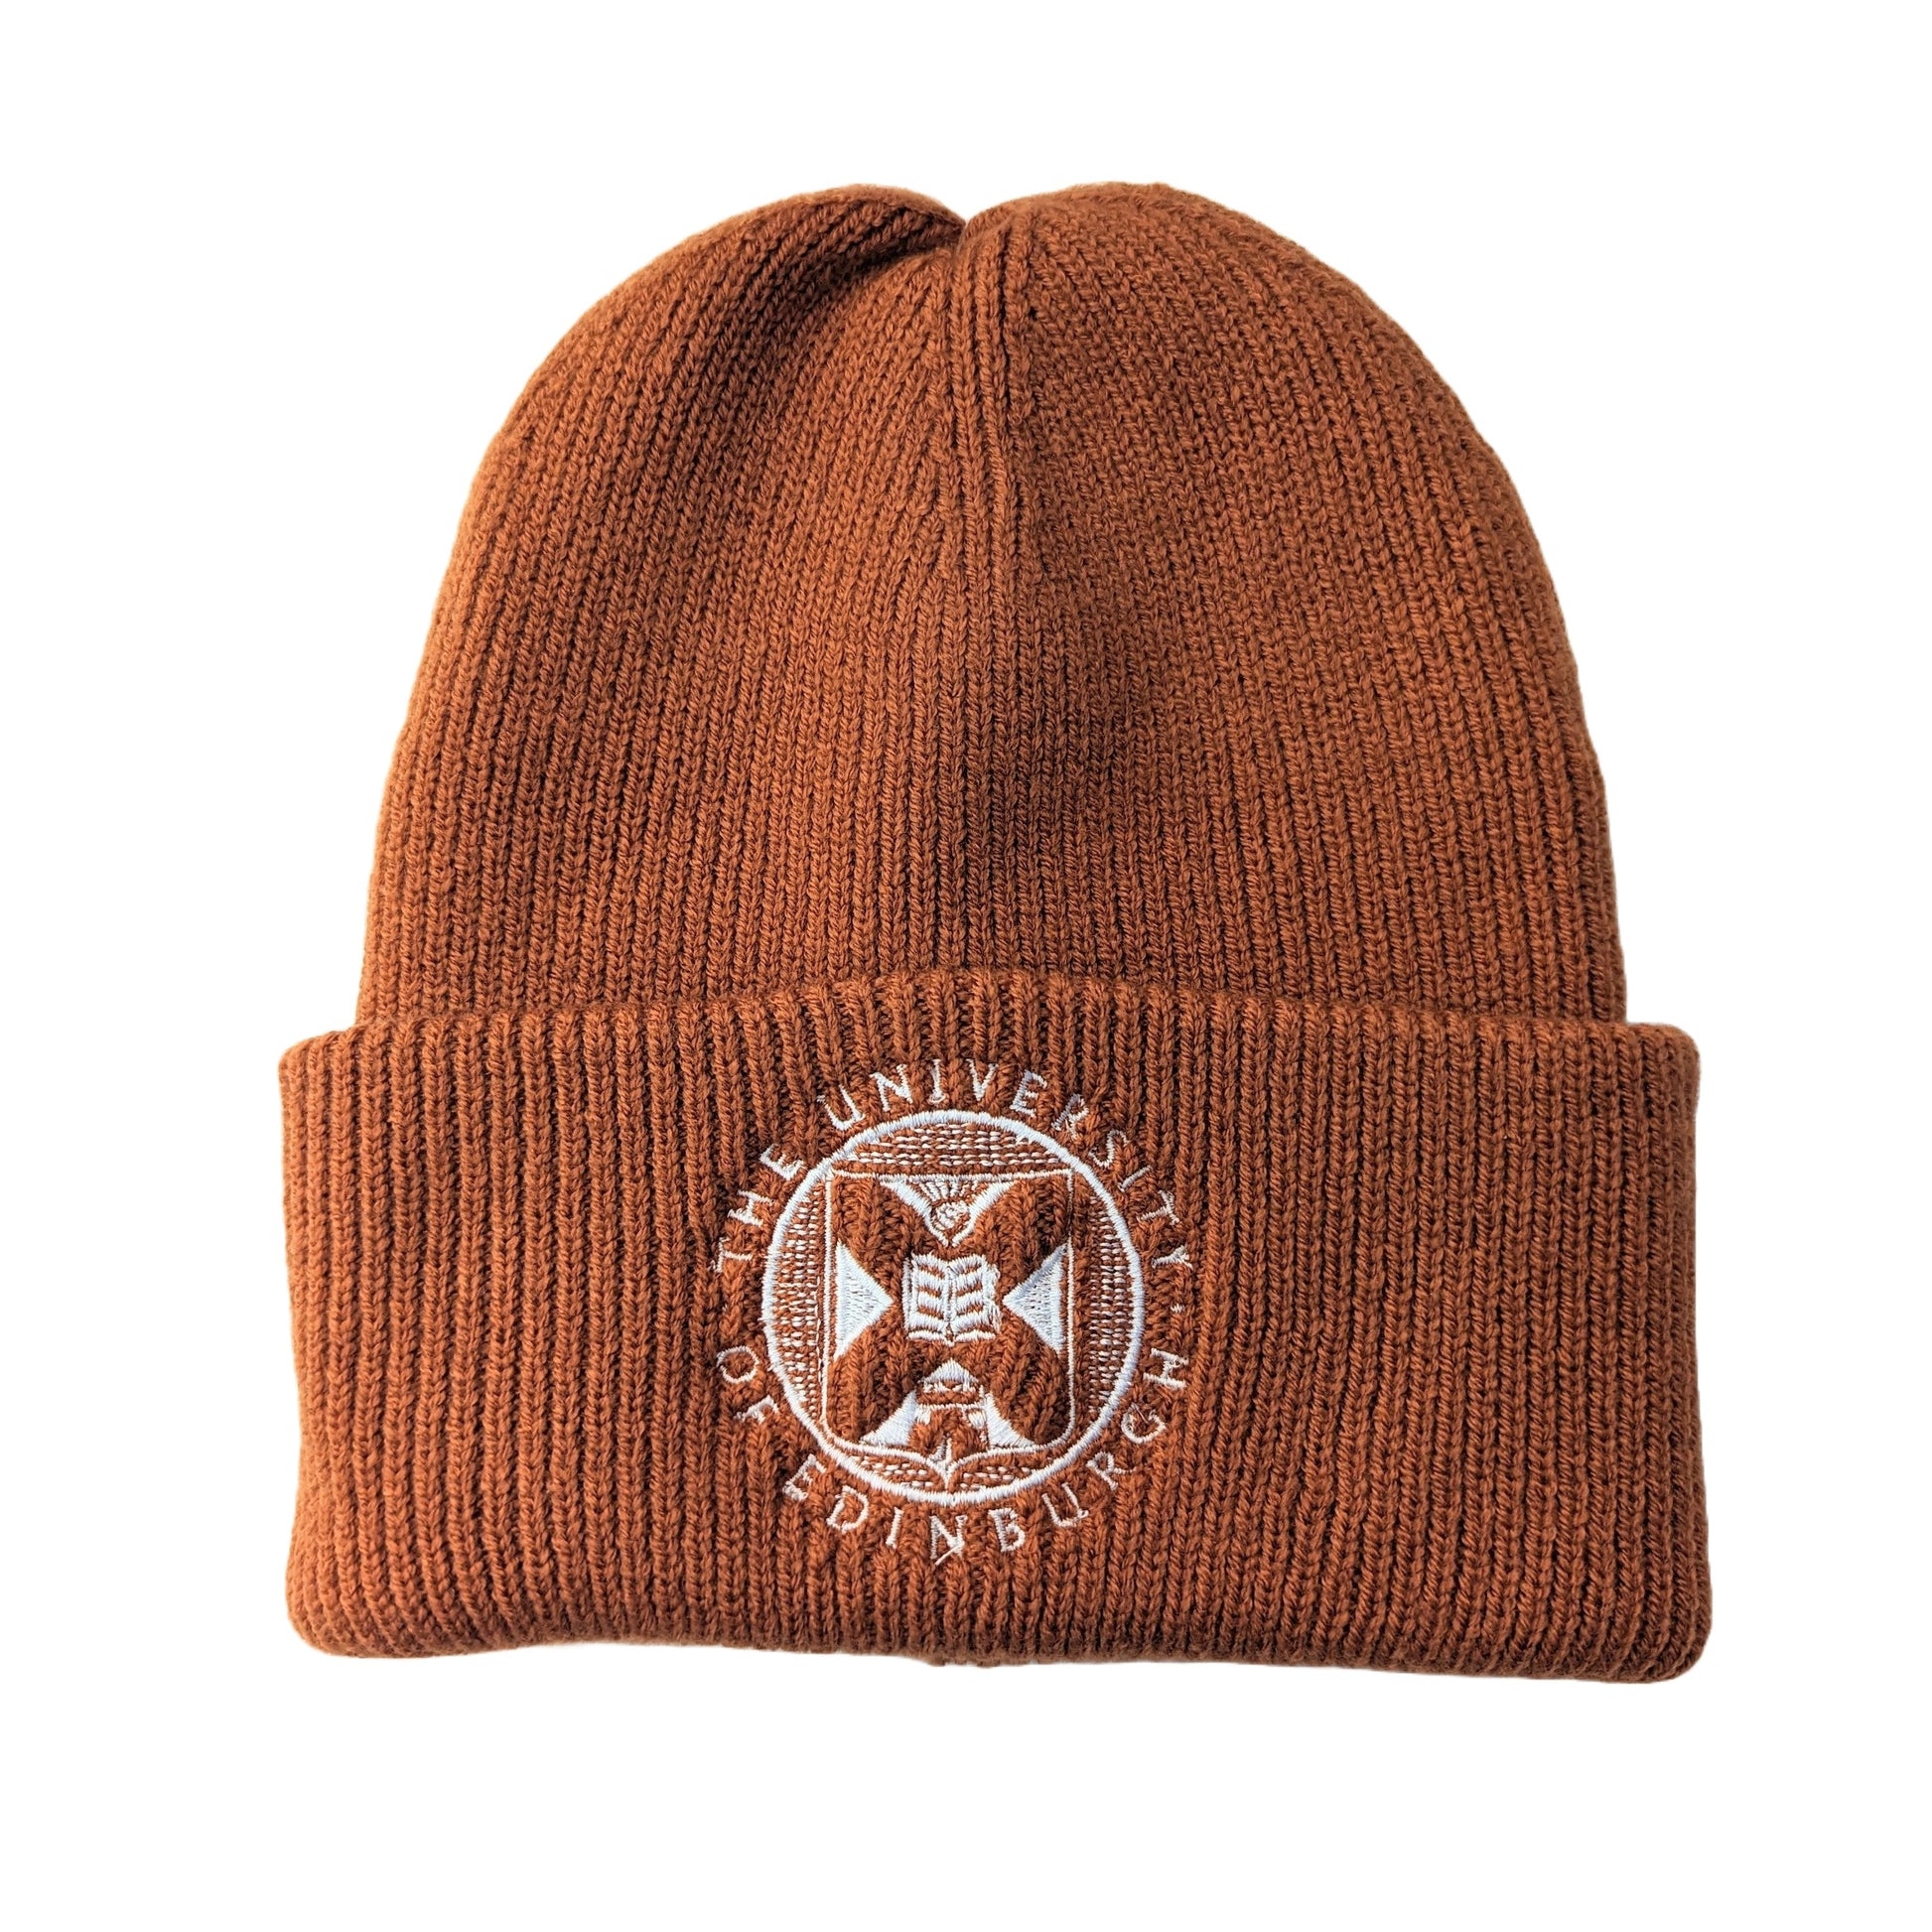 rust orange ribbed cotton beanie with white embroidered university crest